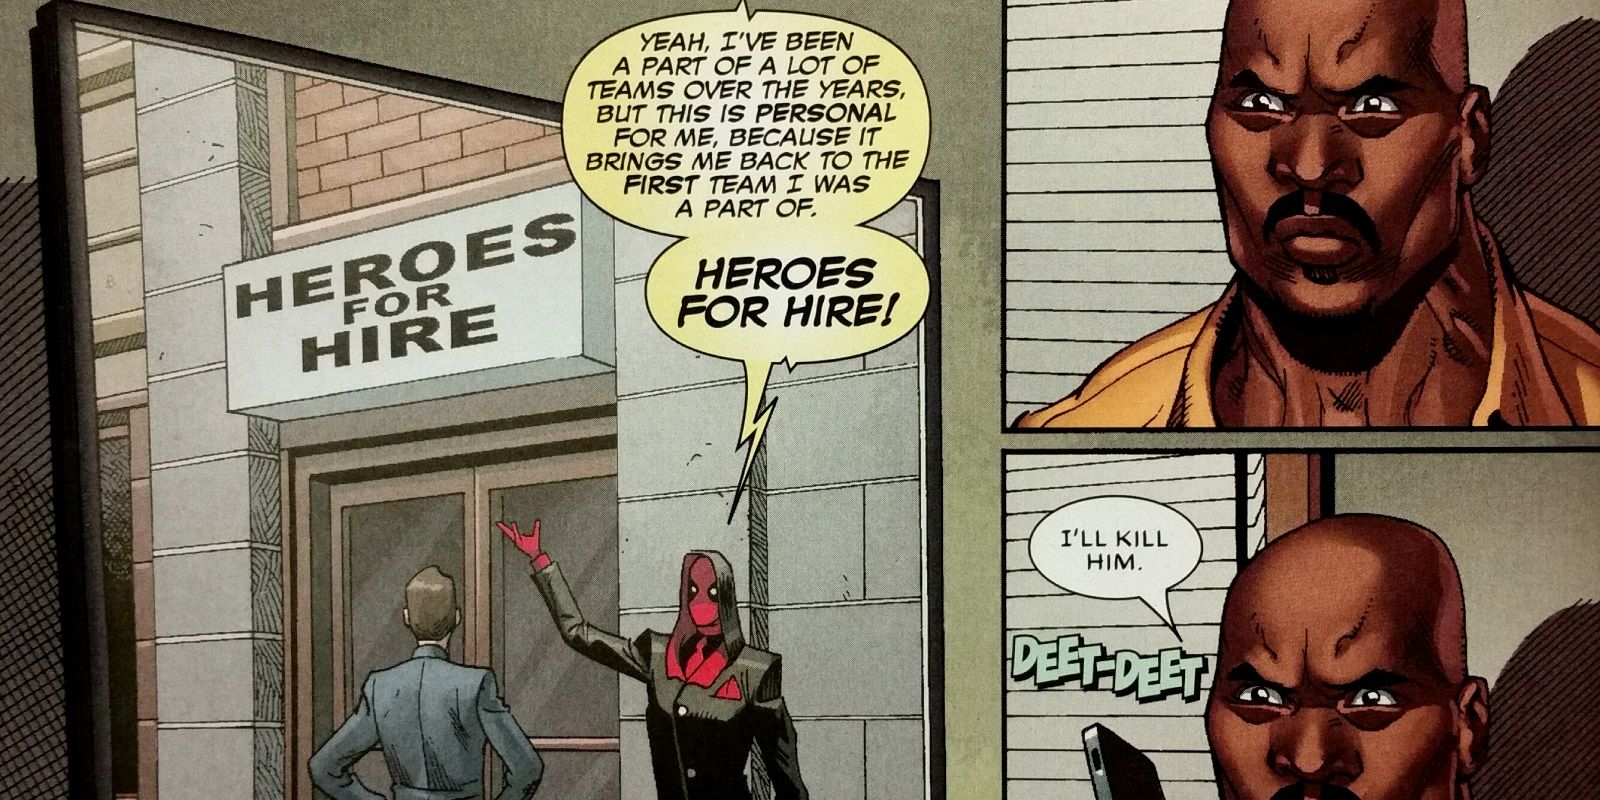 Deadpool copies Heroes for Hire